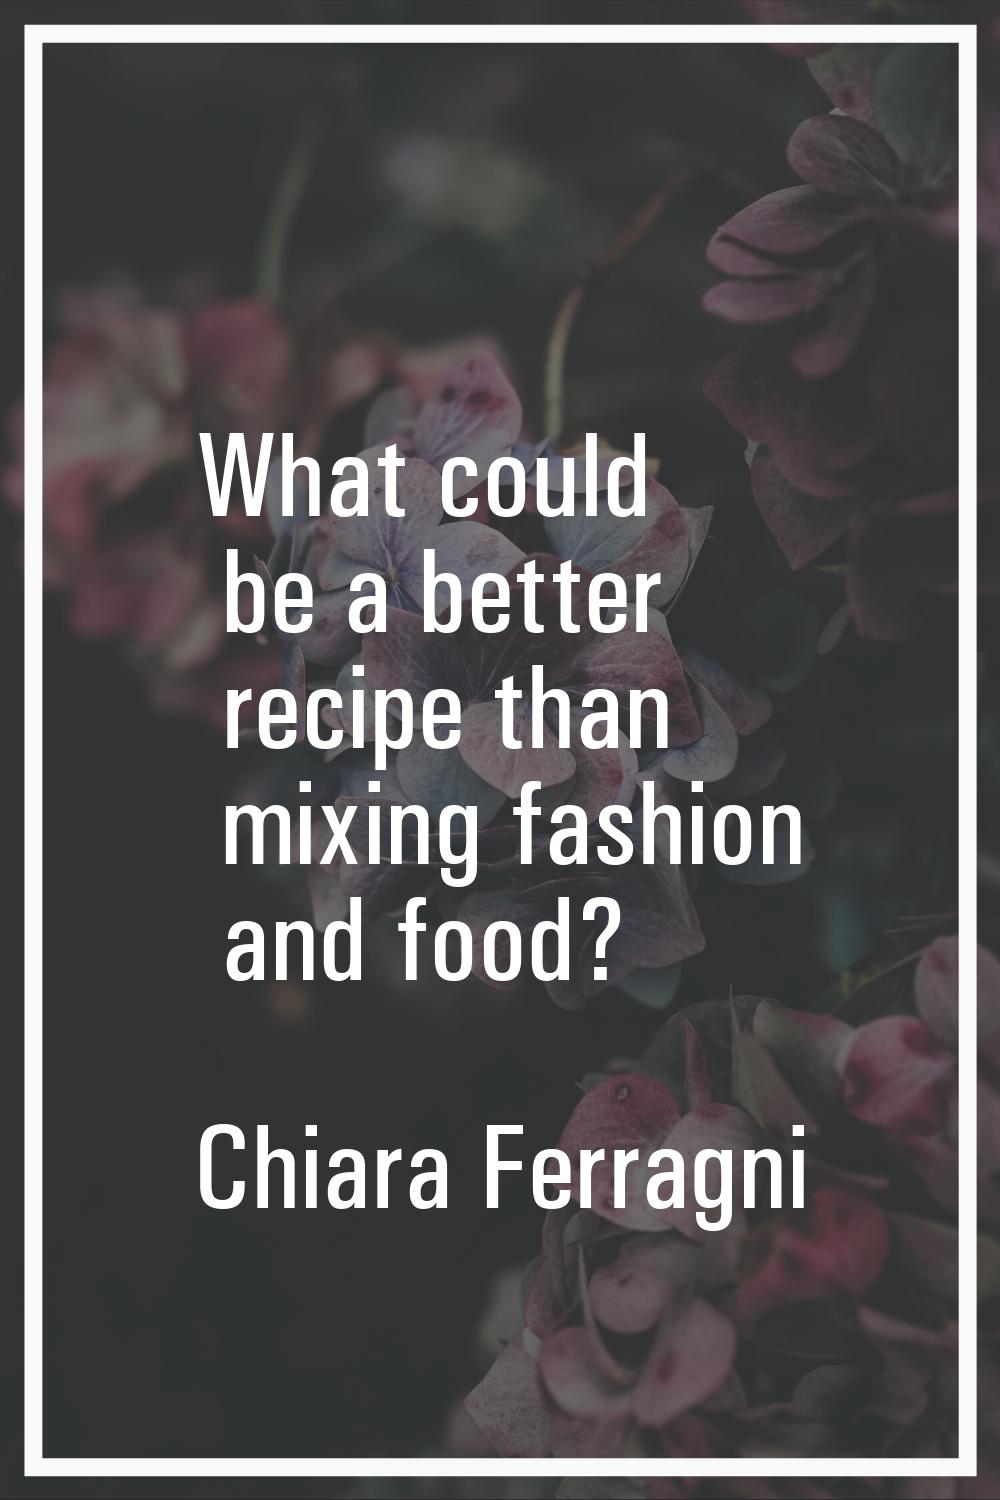 What could be a better recipe than mixing fashion and food?